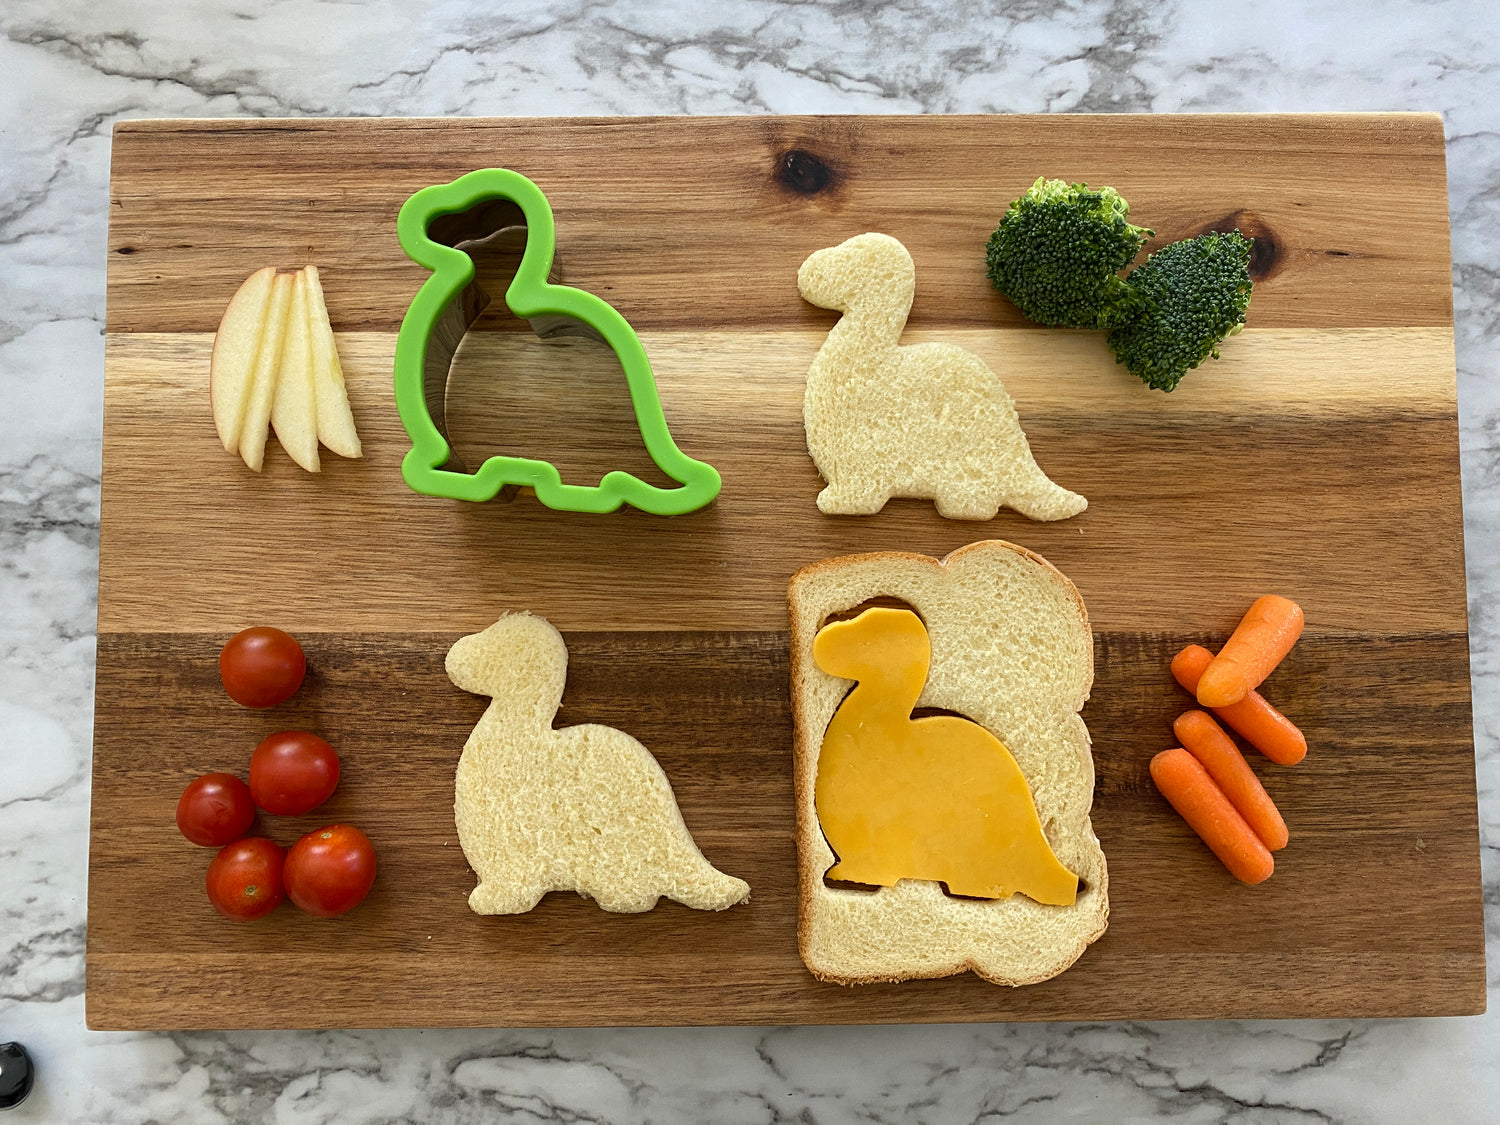 Lifestyle image of dinosaur shaped sandwiches and various snacks on a cutting board